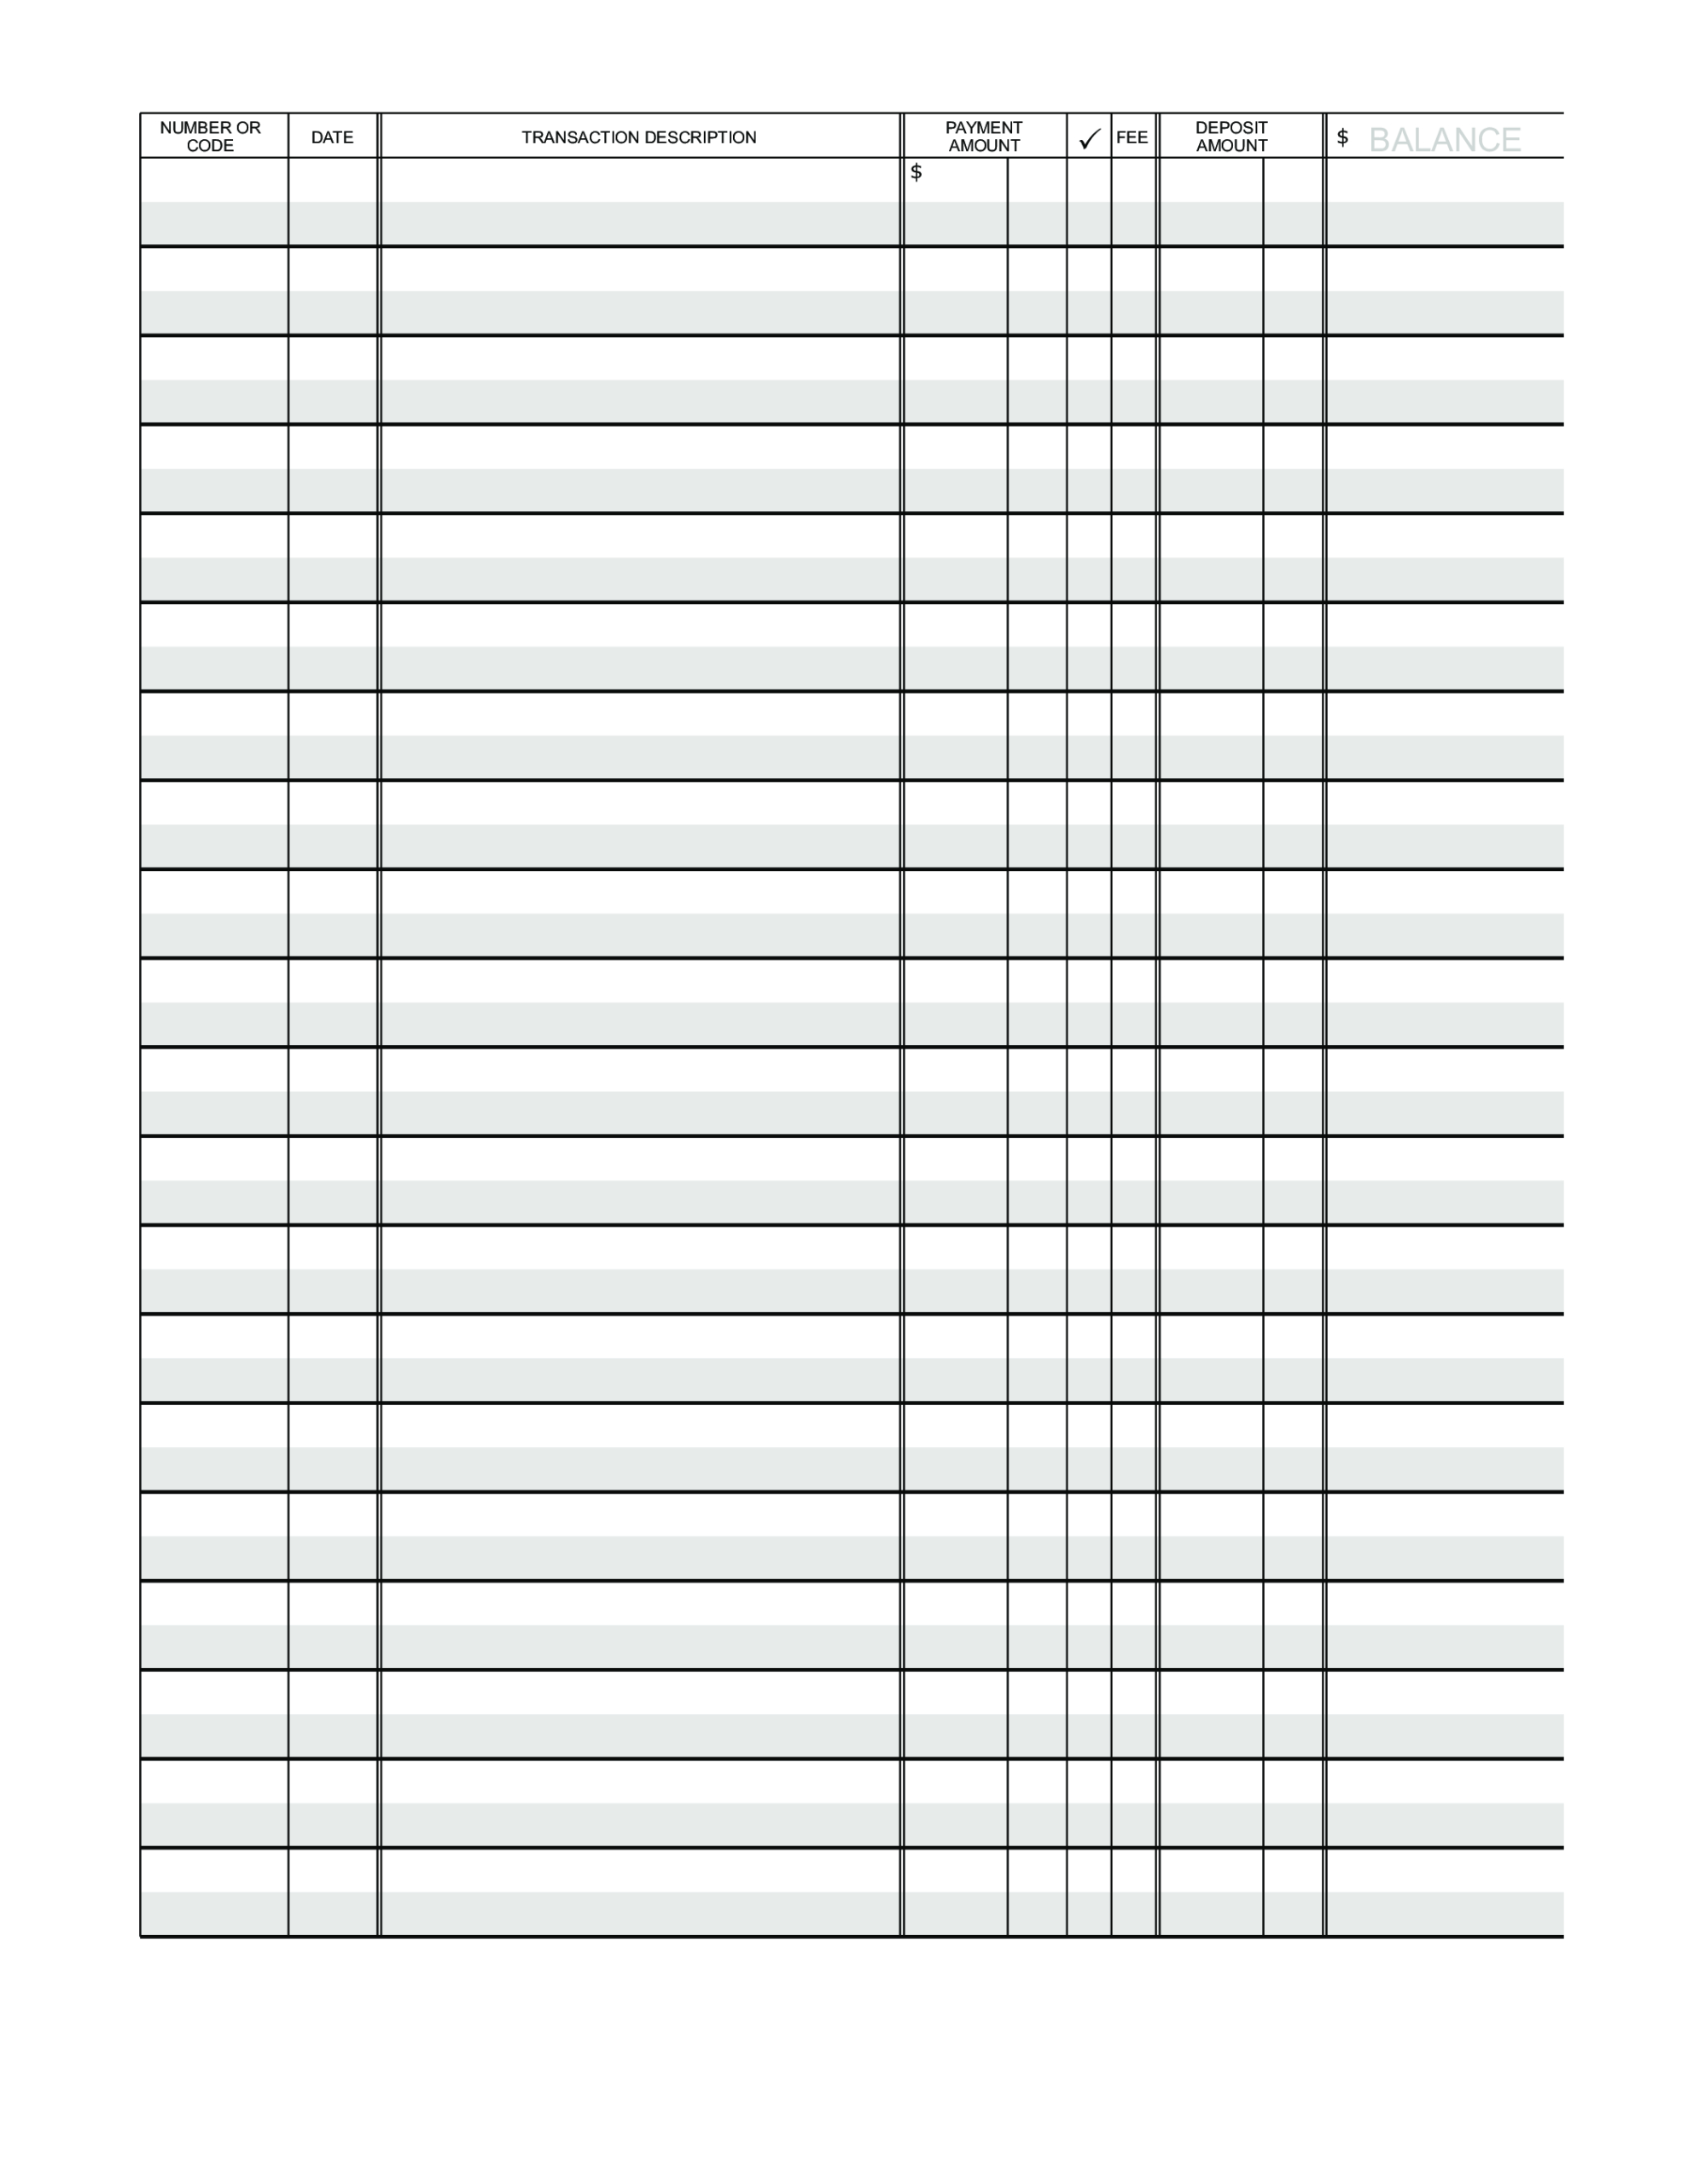 Blank Ledger Paper | Templates At Allbusinesstemplates Inside Blank Ledger Template